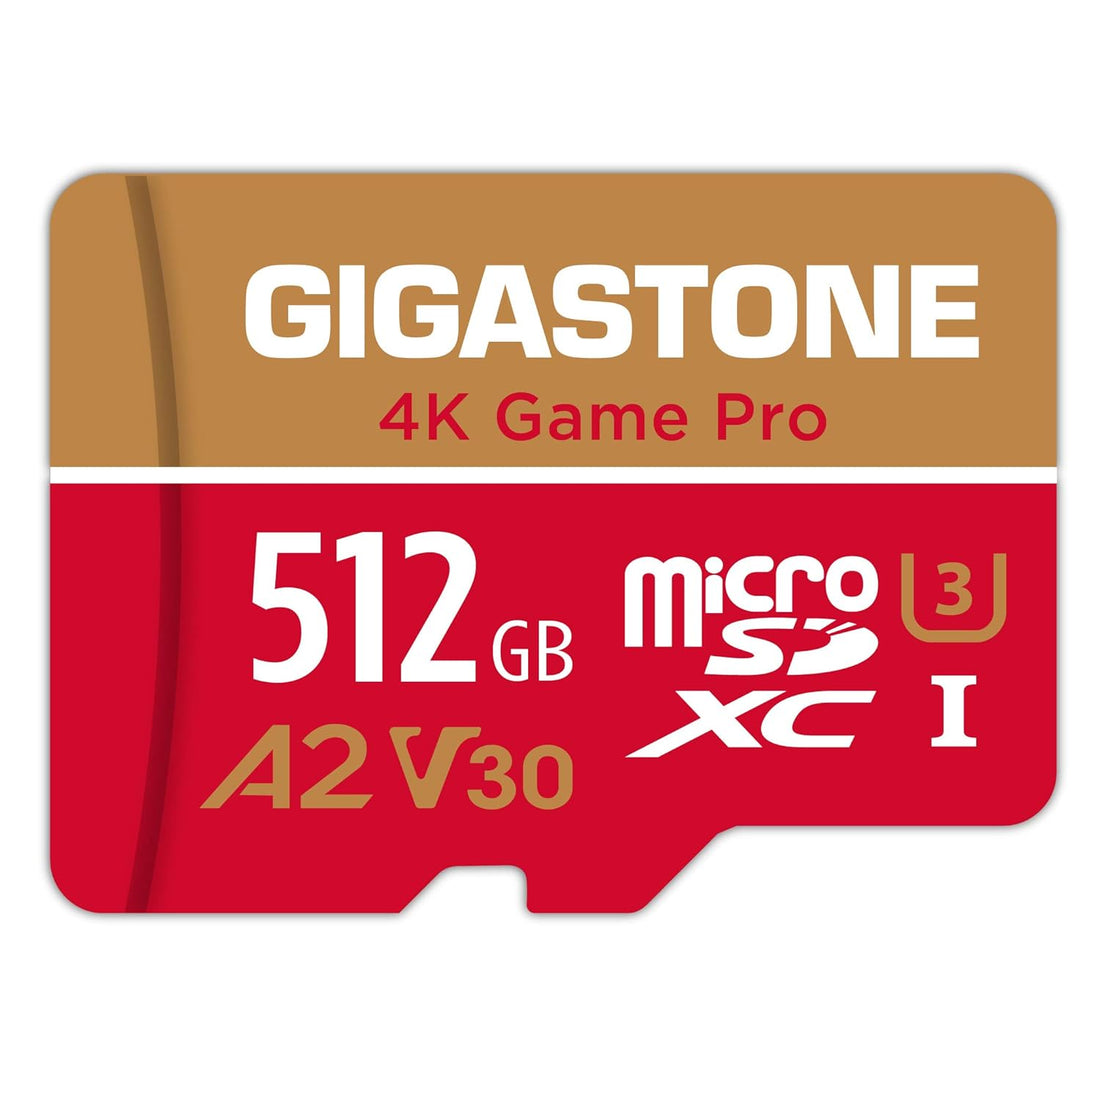 [Gigastone] 512GB Micro SD Card, 4K Game Pro, MicroSDXC Memory Card for Nintendo-Switch, GoPro, Security Camera, DJI, Drone, UHD Video, R/W up to 100/60MB/s, UHS-I U3 A2 V30 C10